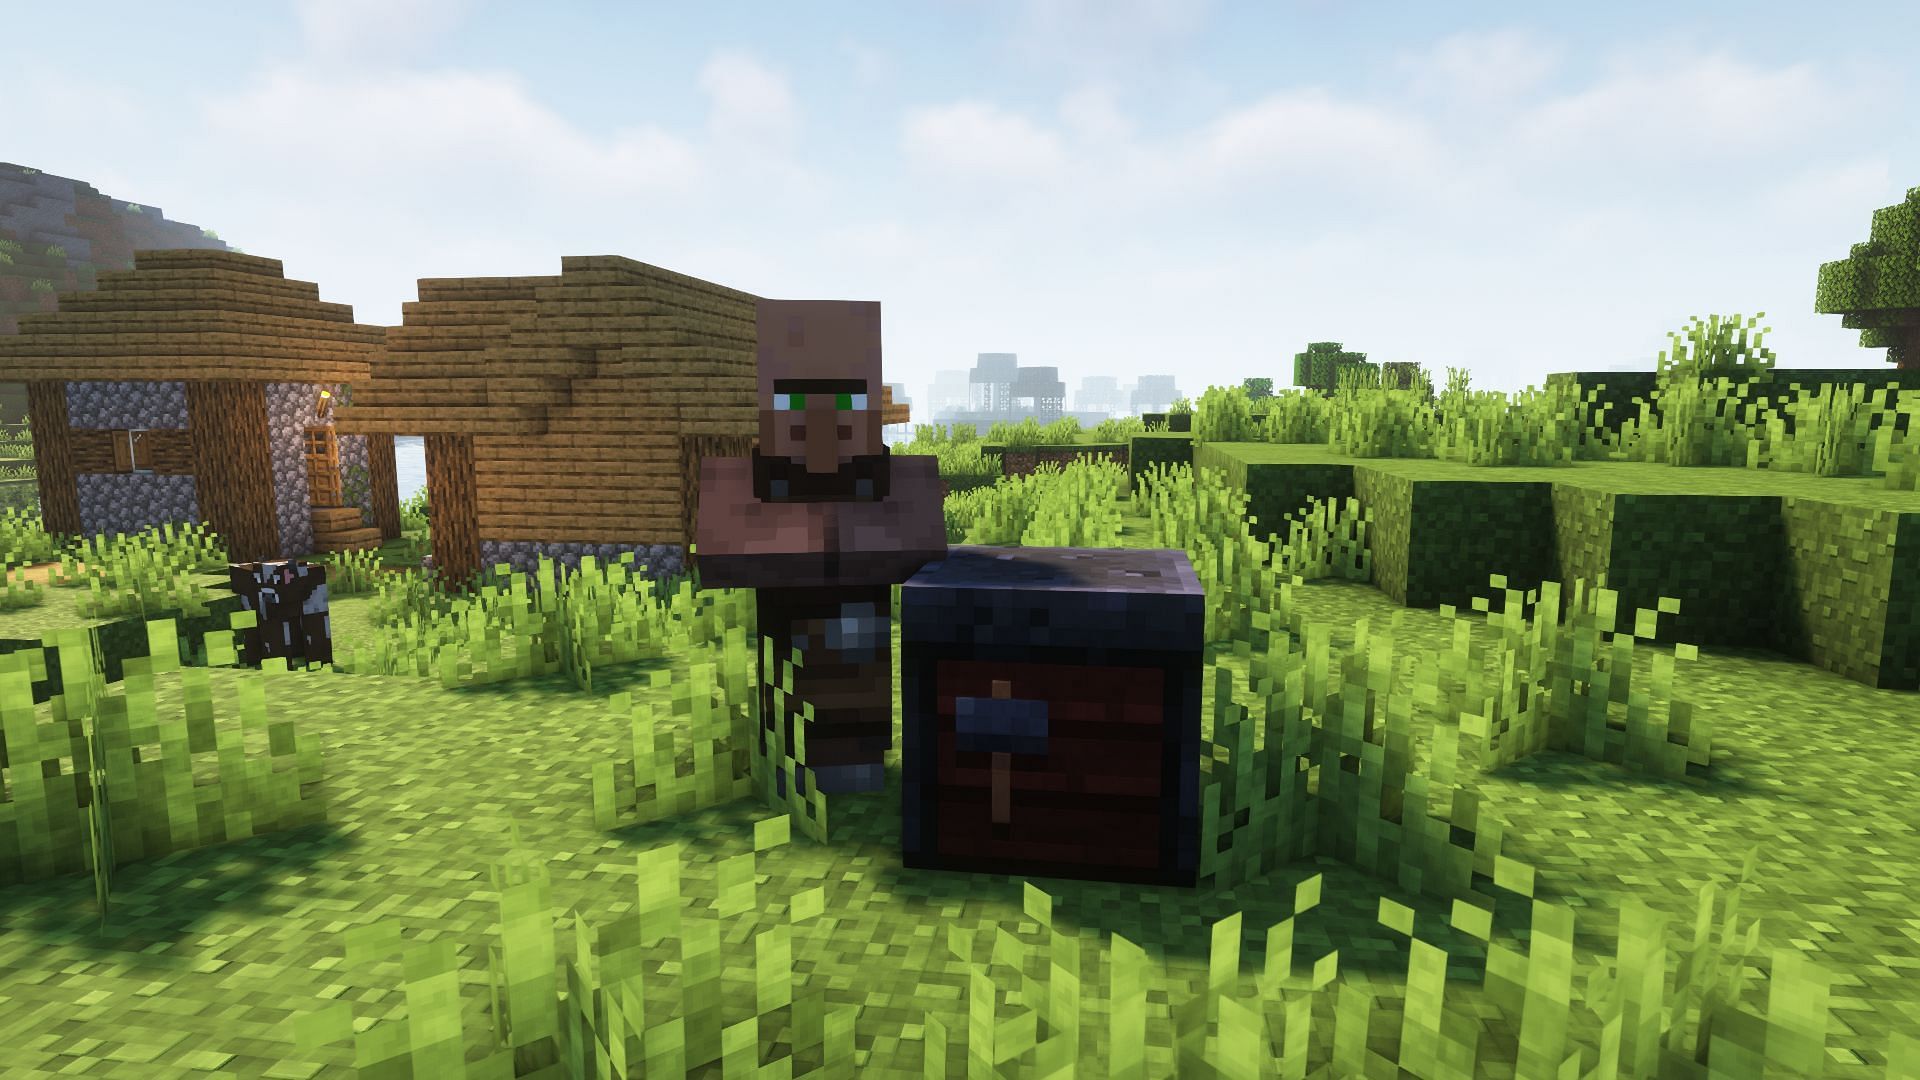 A toolsmith in the game next to its smithing table (Image via Mojang)